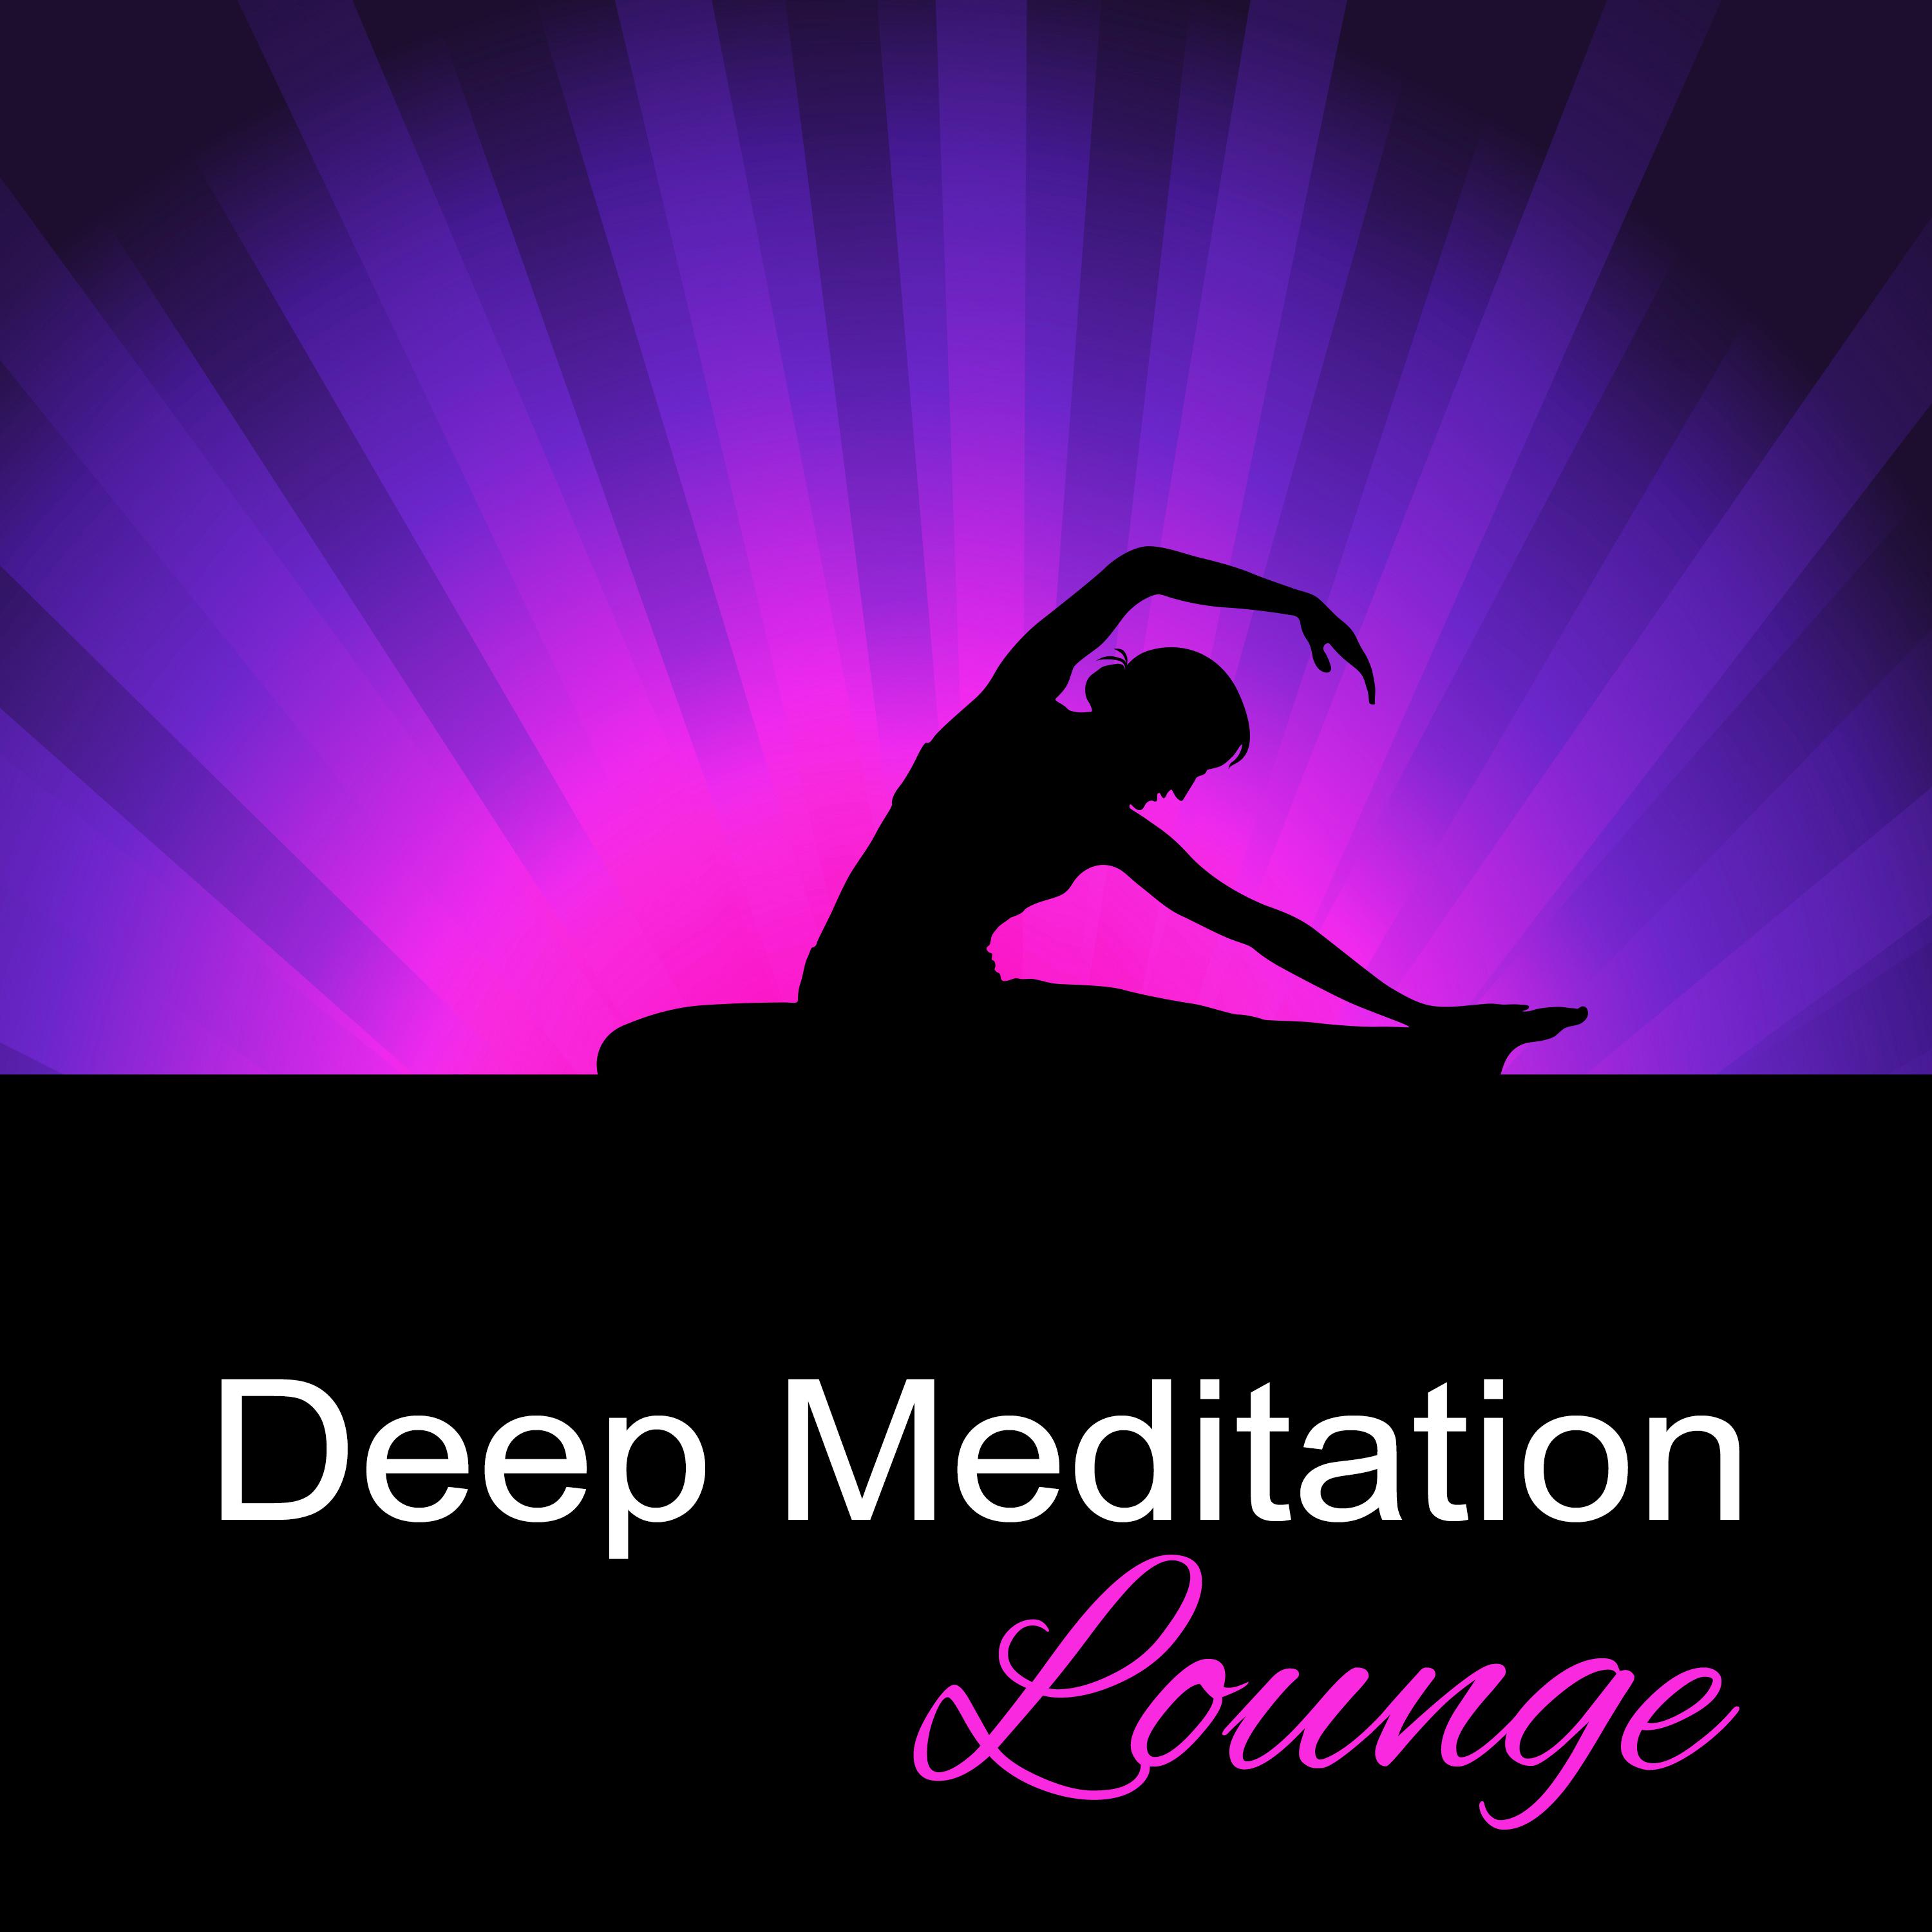 Deep Meditation Lounge – New Age Meditation, Sounds to Help You Focus, Relieve Stress with Calm Sounds, Ambient Music